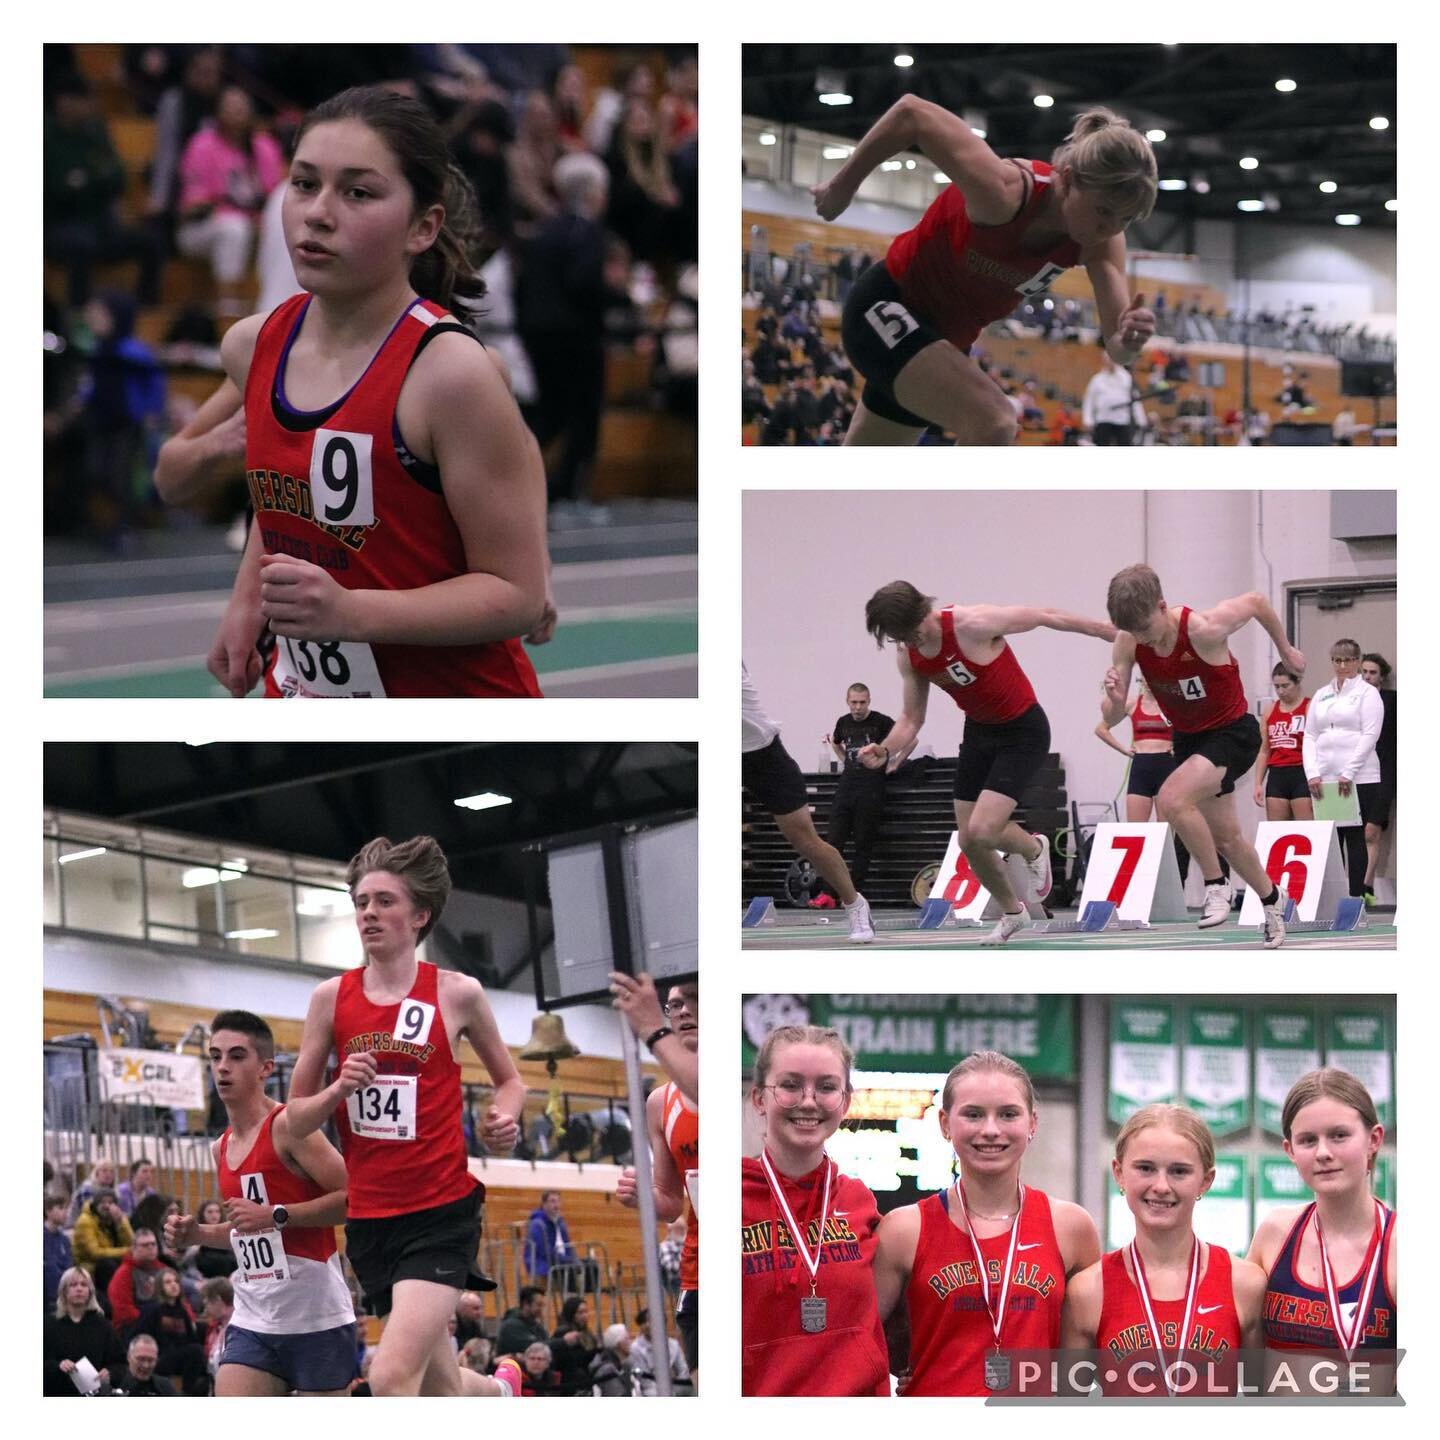 Our RIVA athletes had a great weekend at the track competing in the Kinsmen Indoor Games in Saskatoon. Thanks to Fred Berry for capturing these amazing action photos of our athletes! #rivafamily❤️